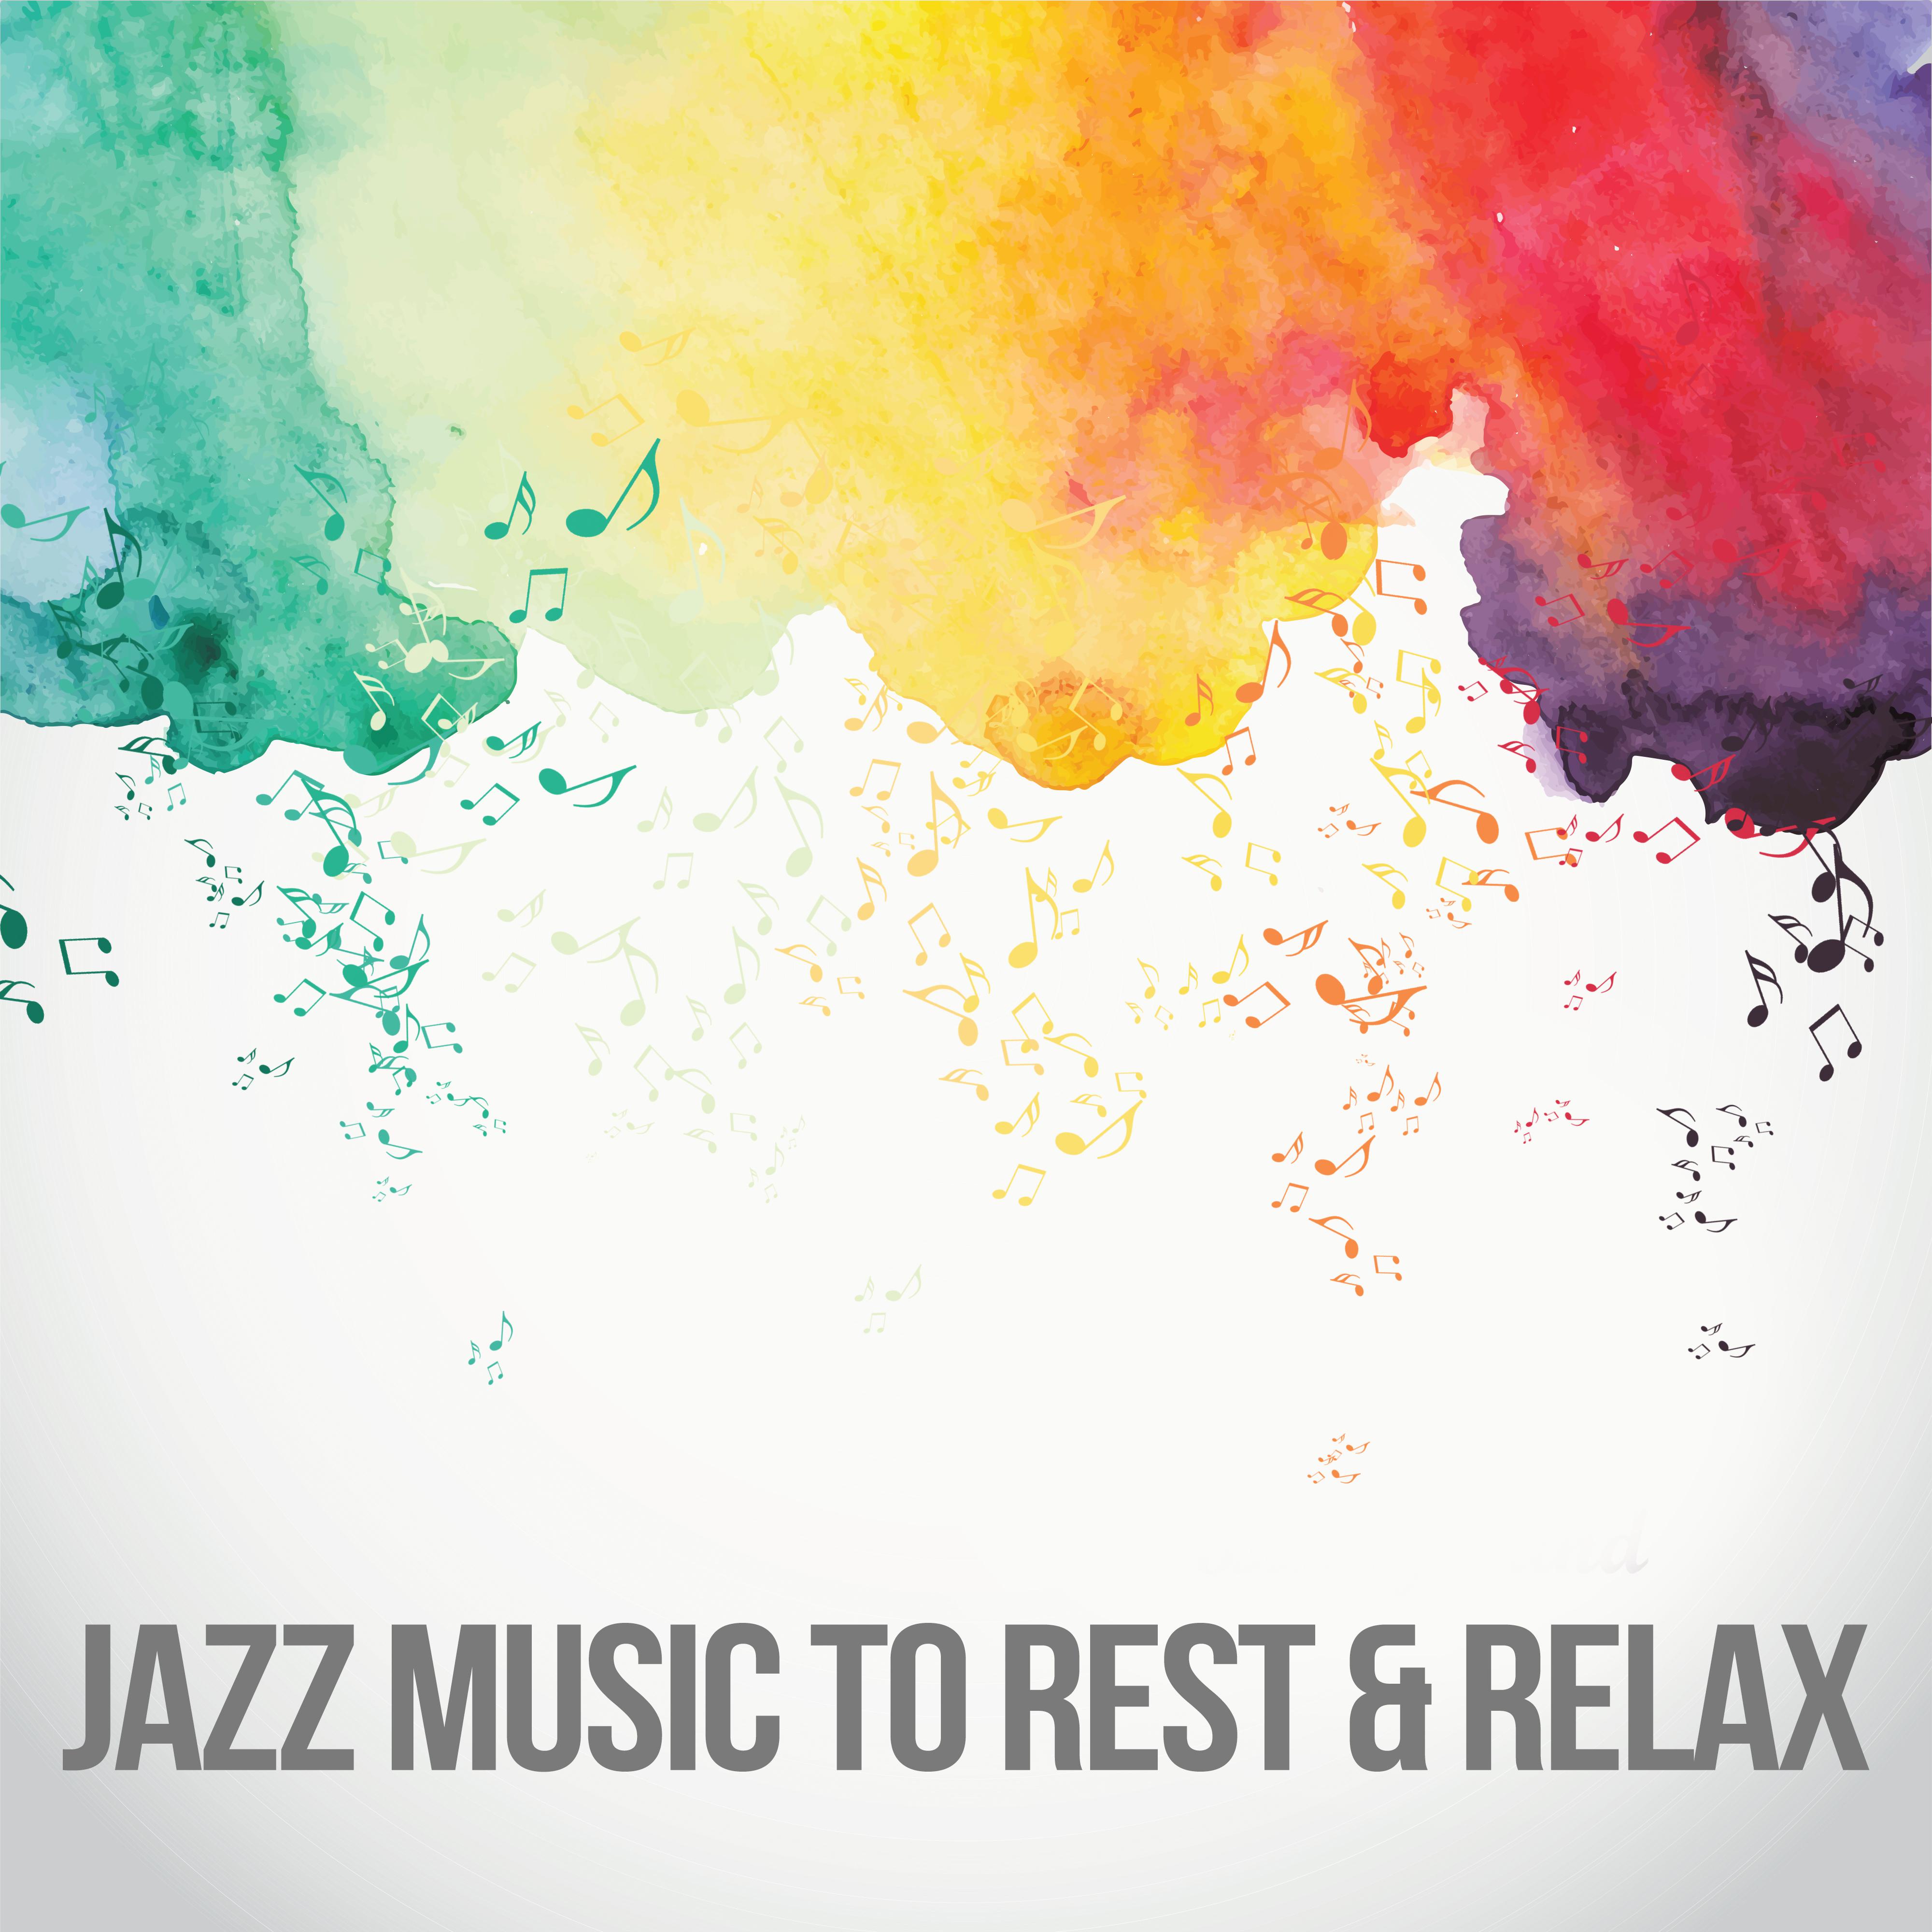 Jazz Music to Rest & Relax – Calm Music, Easy Listening, Background Music, Jazz Relaxation, Chilled Jazz